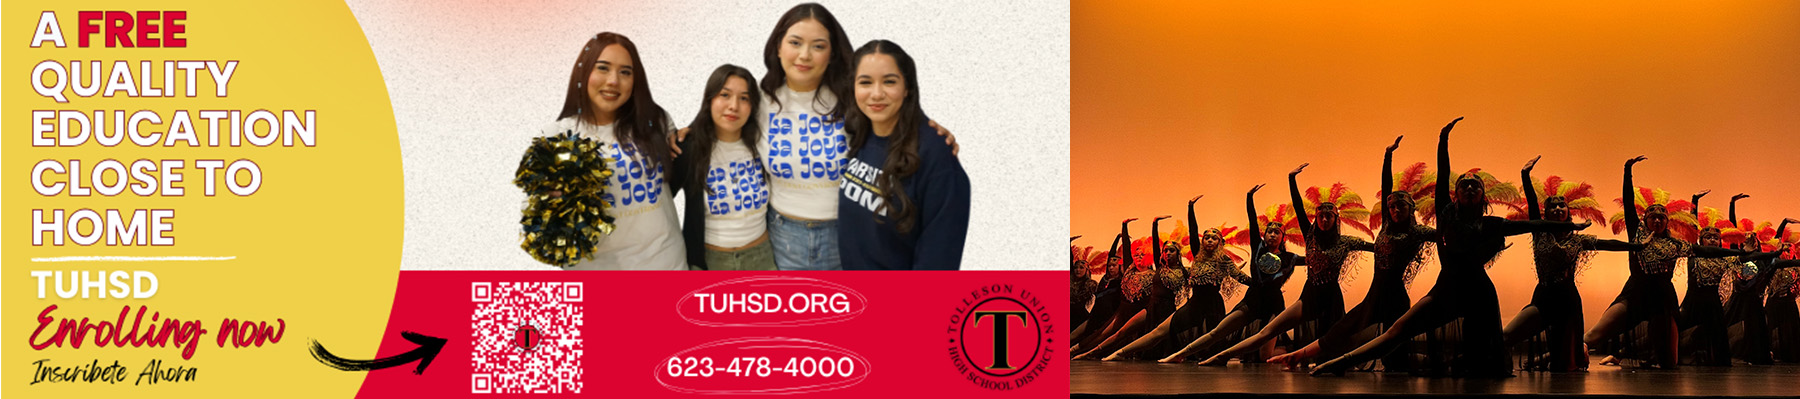 A free quality education close to home - TUHSD Enrolling now | Inscribete Ahora - tuhsd.org - 623-478-4000 | Student dancers on stage